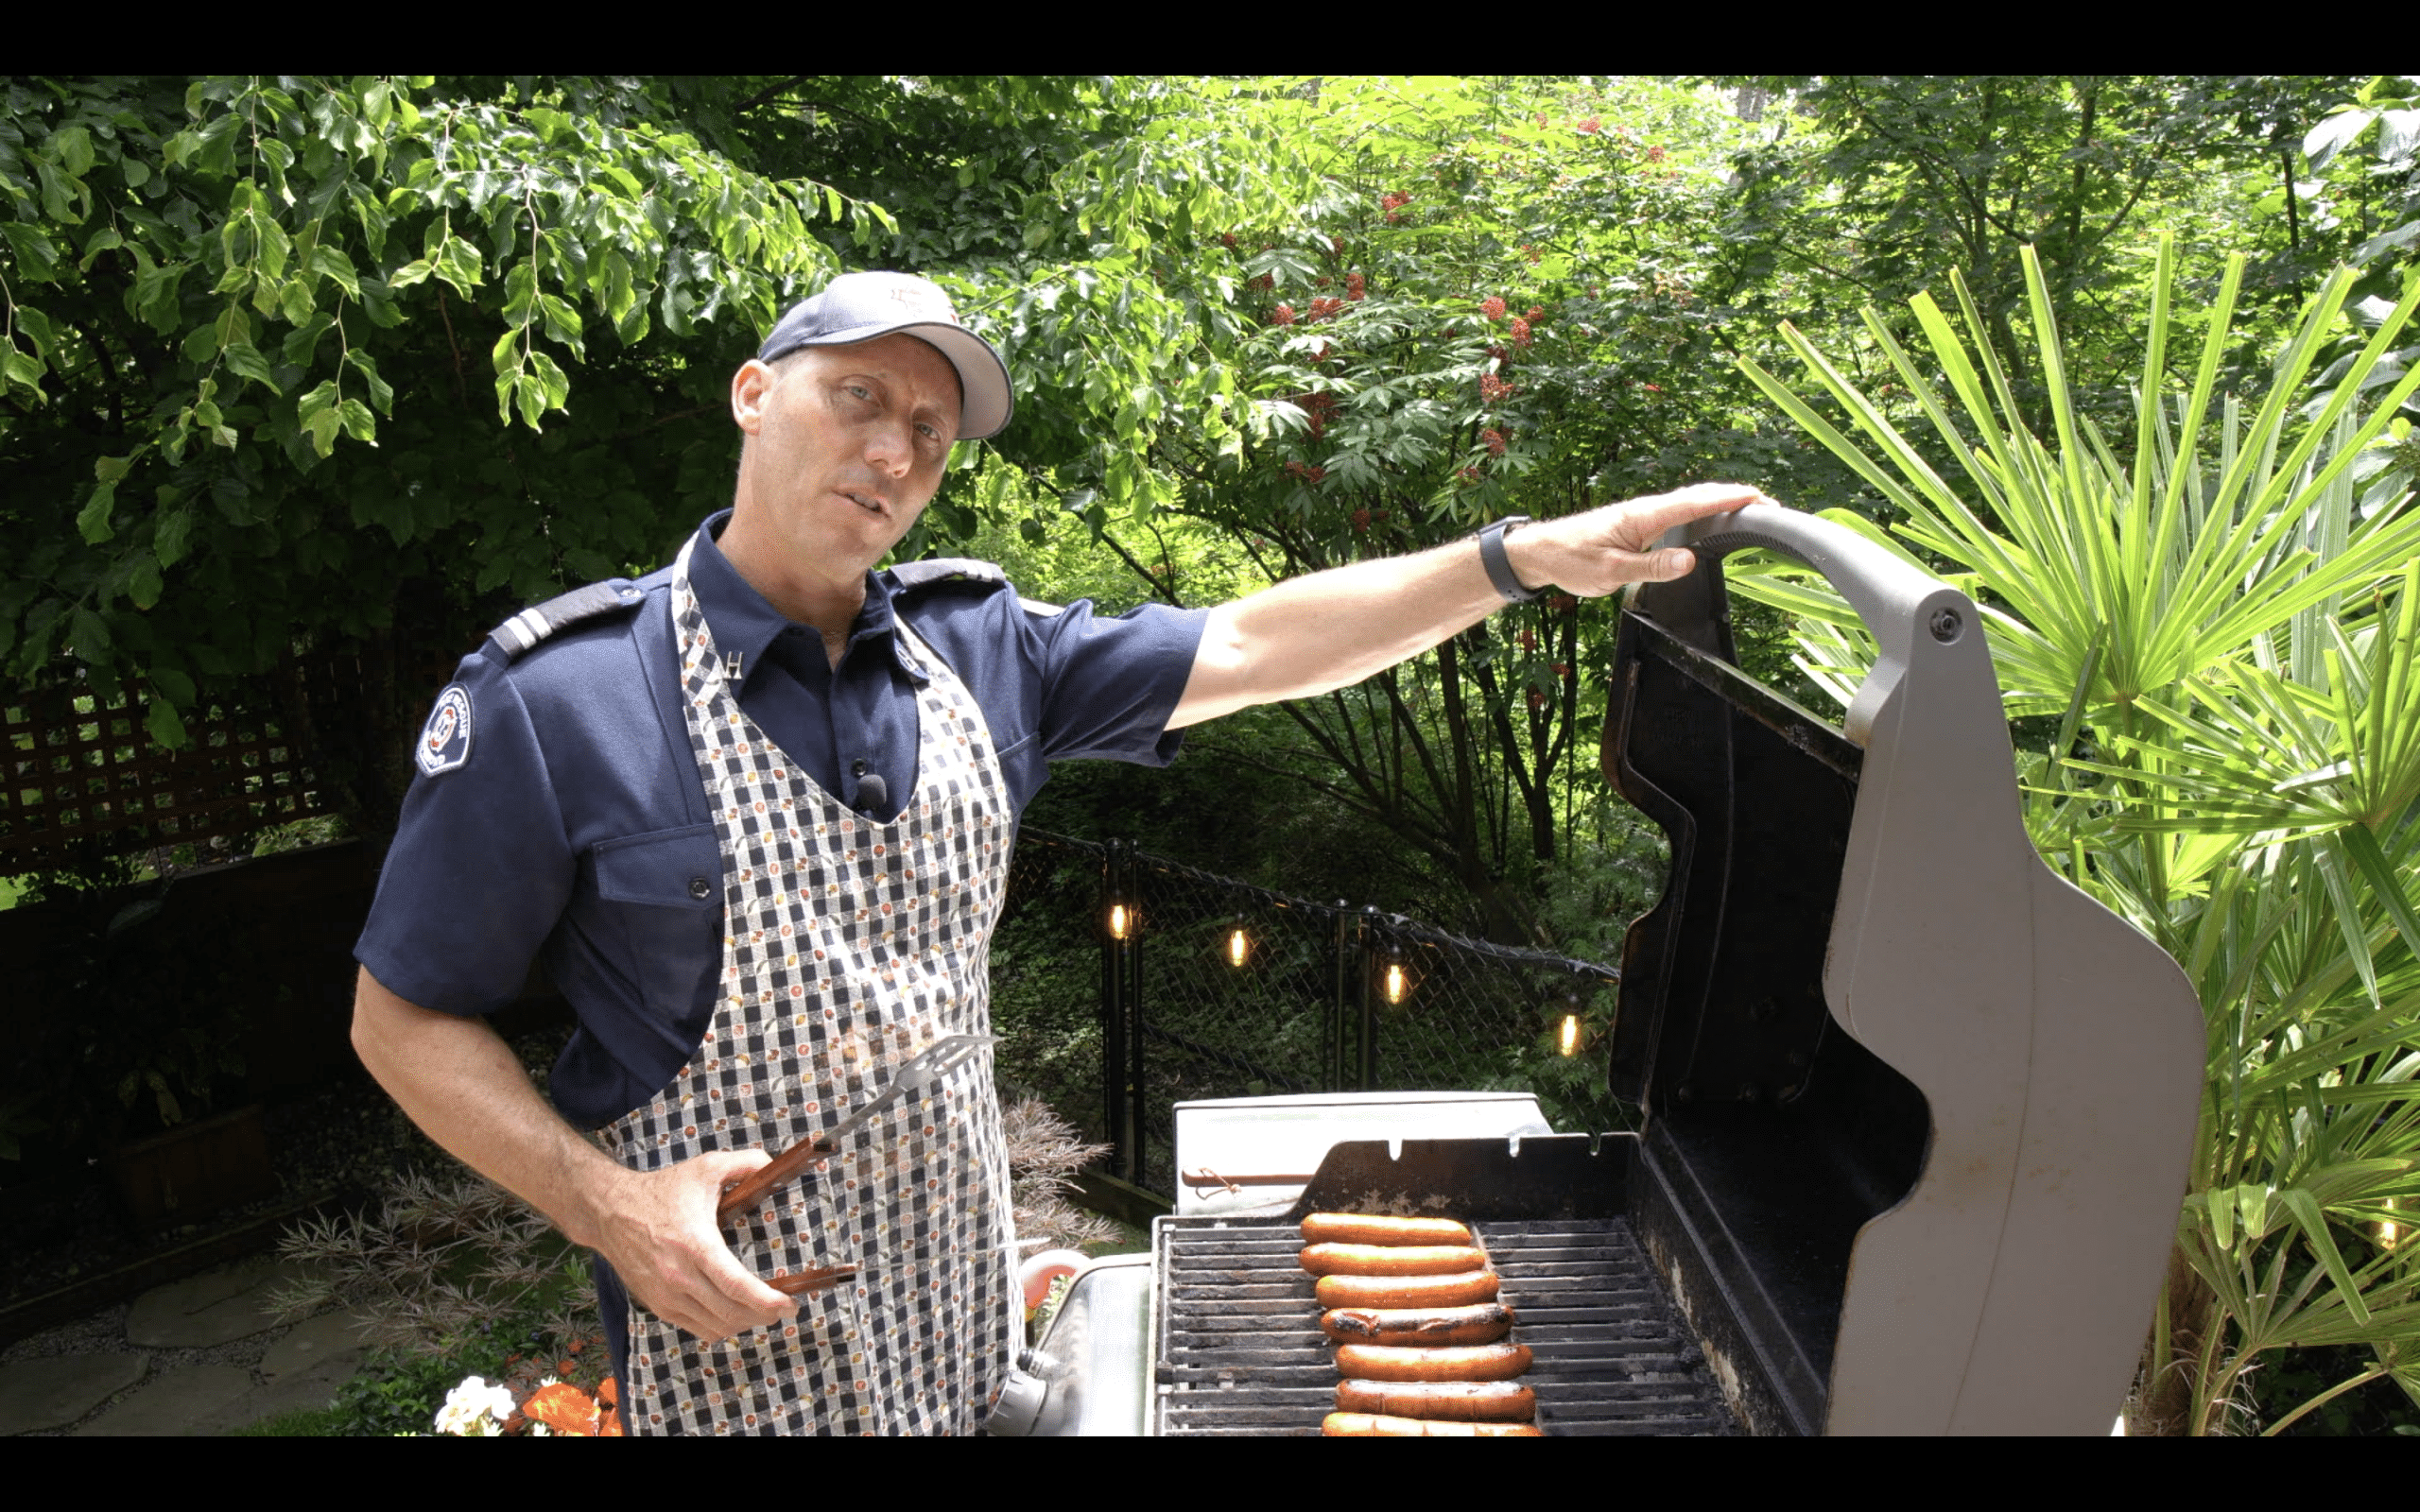 BBQ Safety Tips